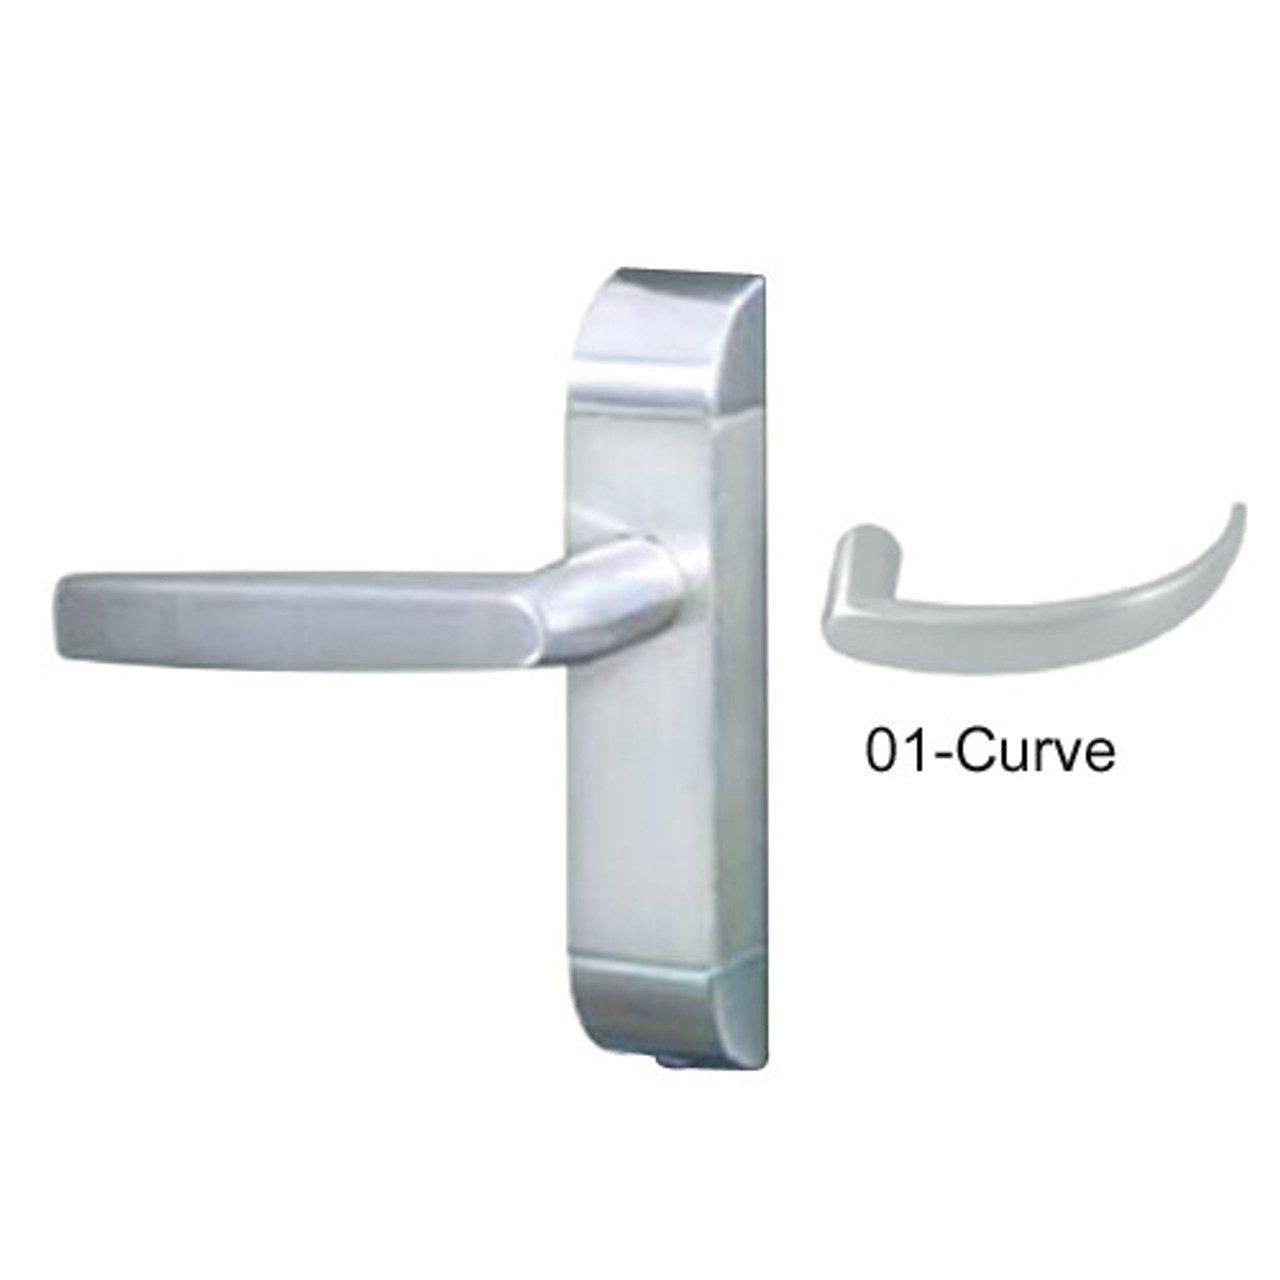 4600-01-542-US32 Adams Rite Heavy Duty Curve Deadlatch Handles in Bright Stainless Finish